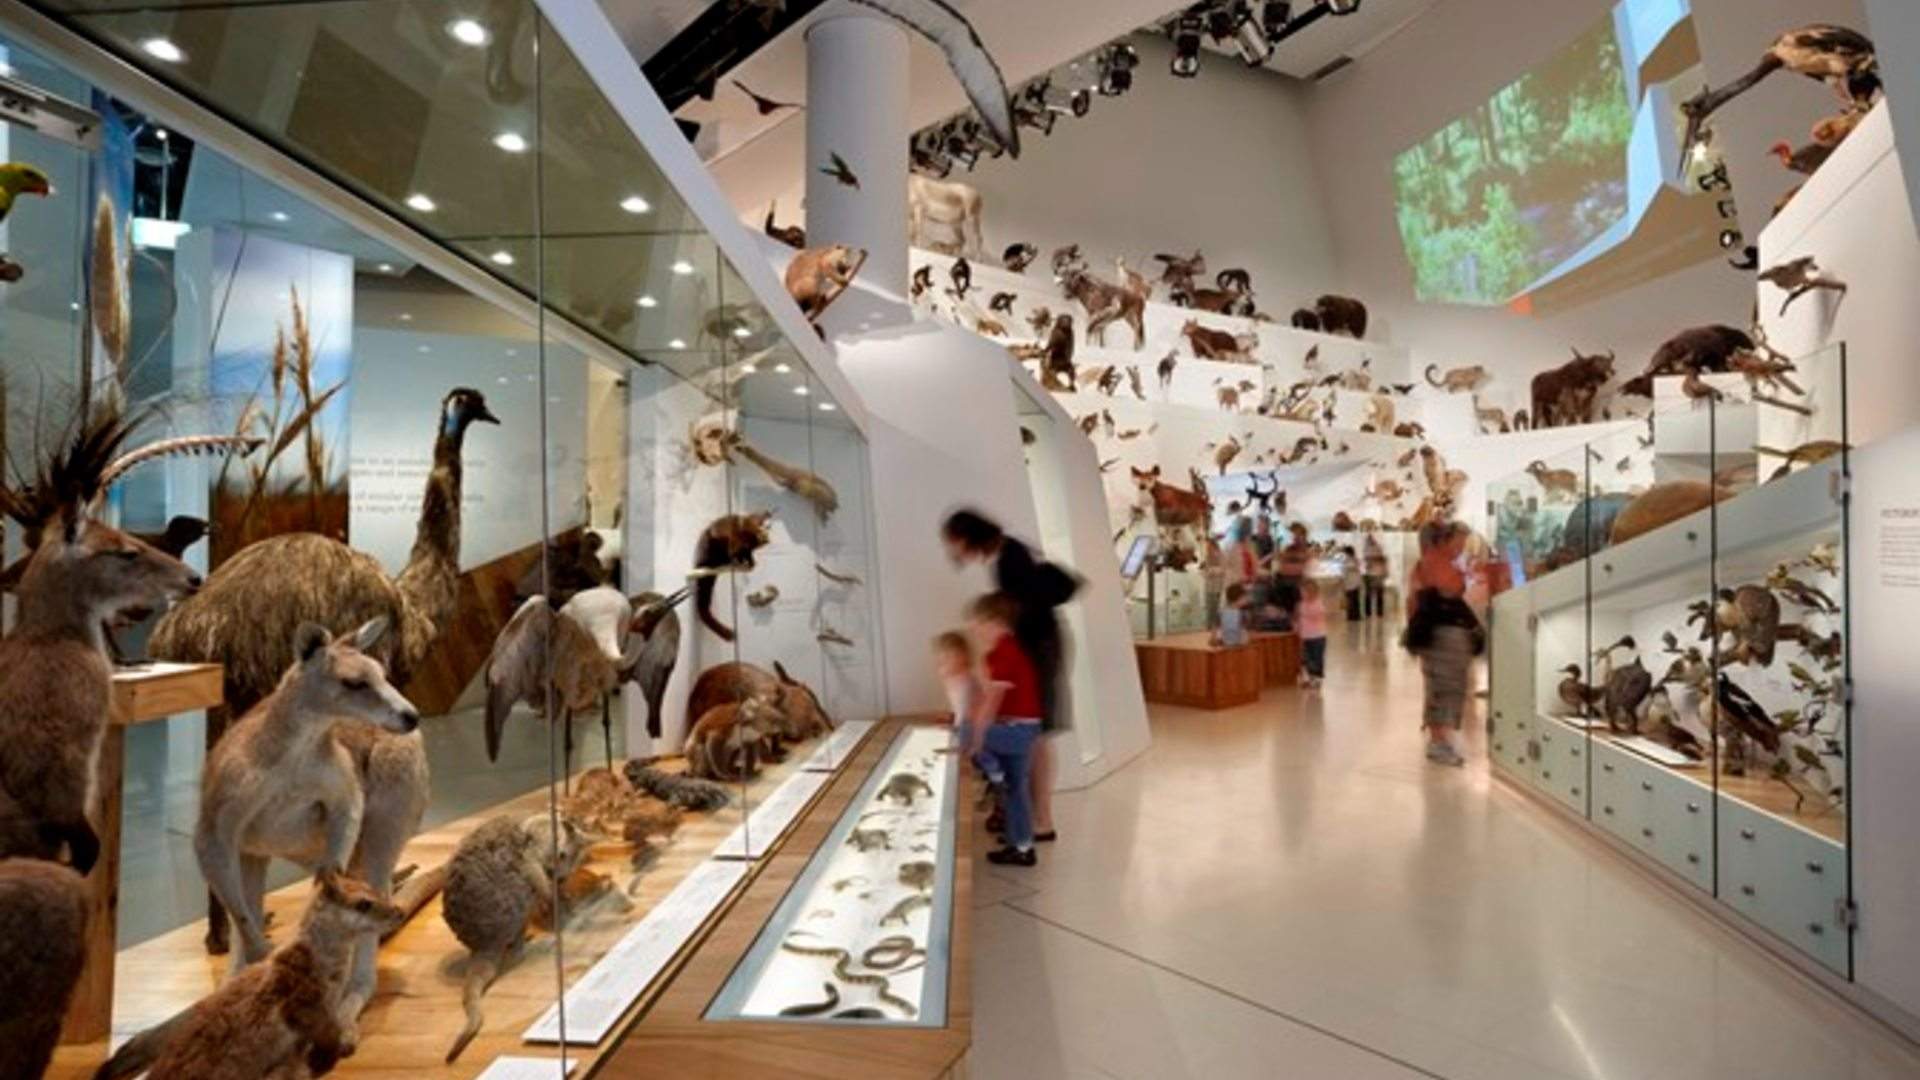 Melbourne Museum's Long-Running Animal Exhibition Is Closing After 11 Years On Display